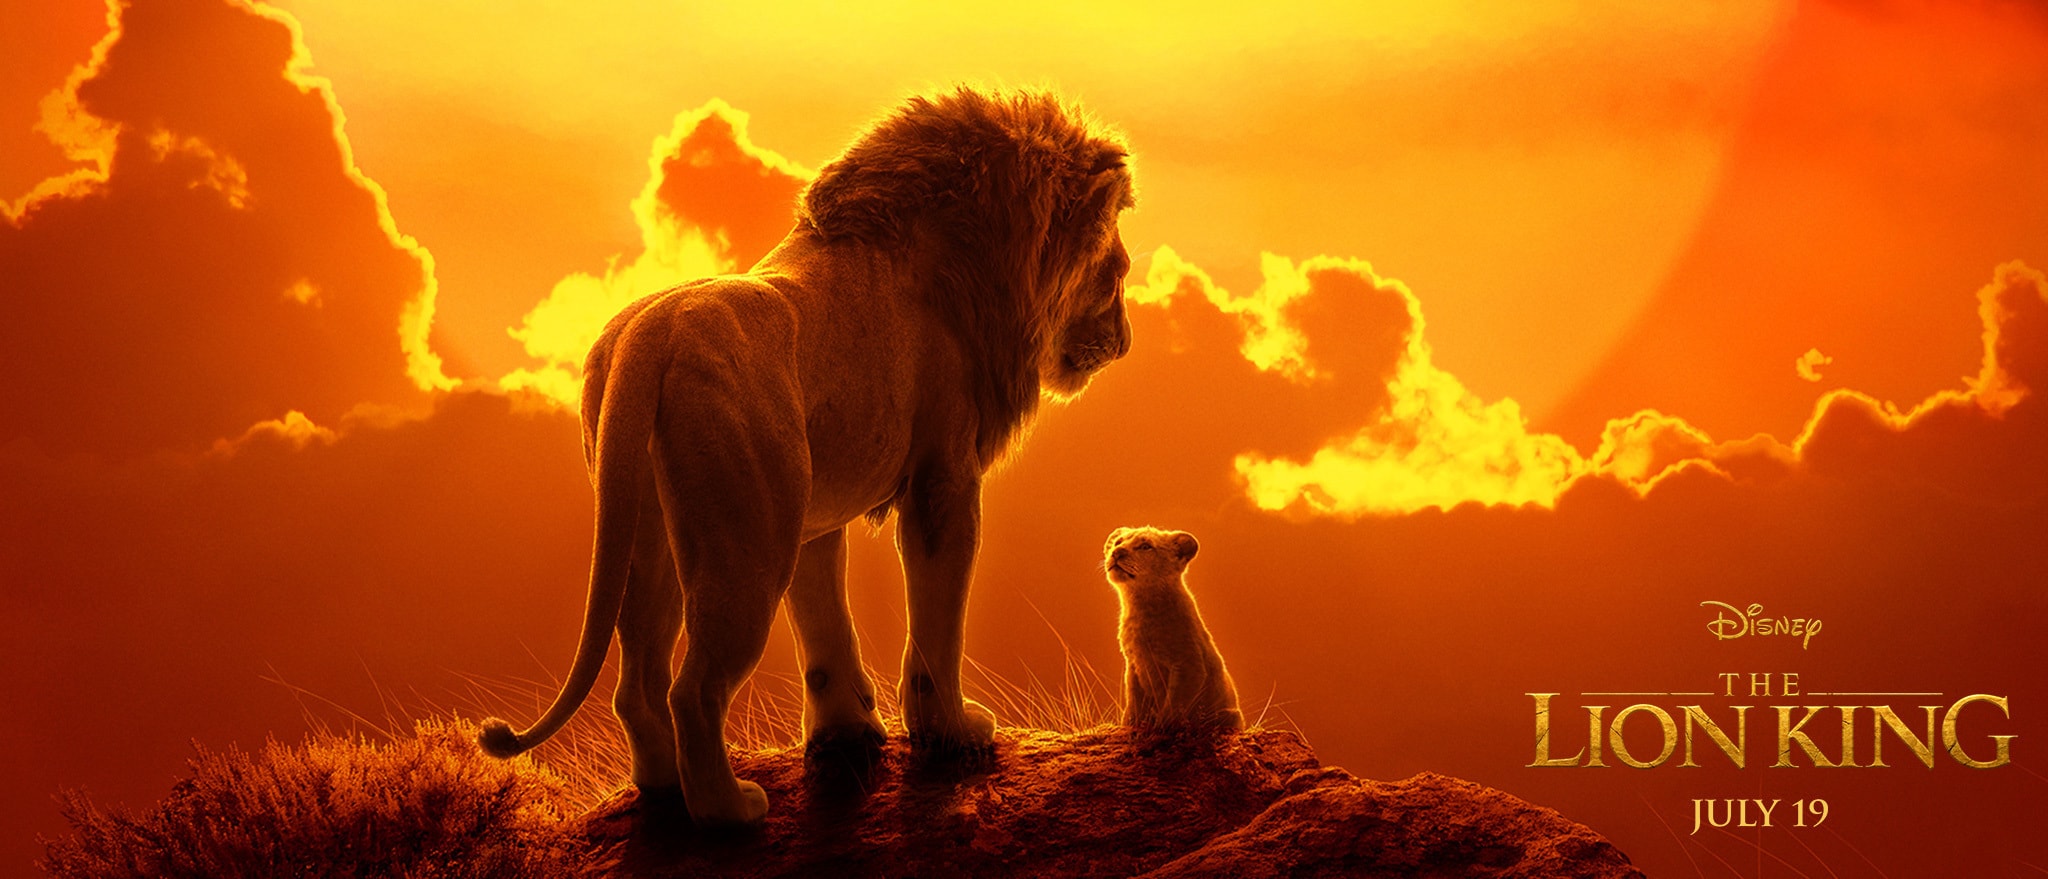 Why You Should Be Excited For The Lion King